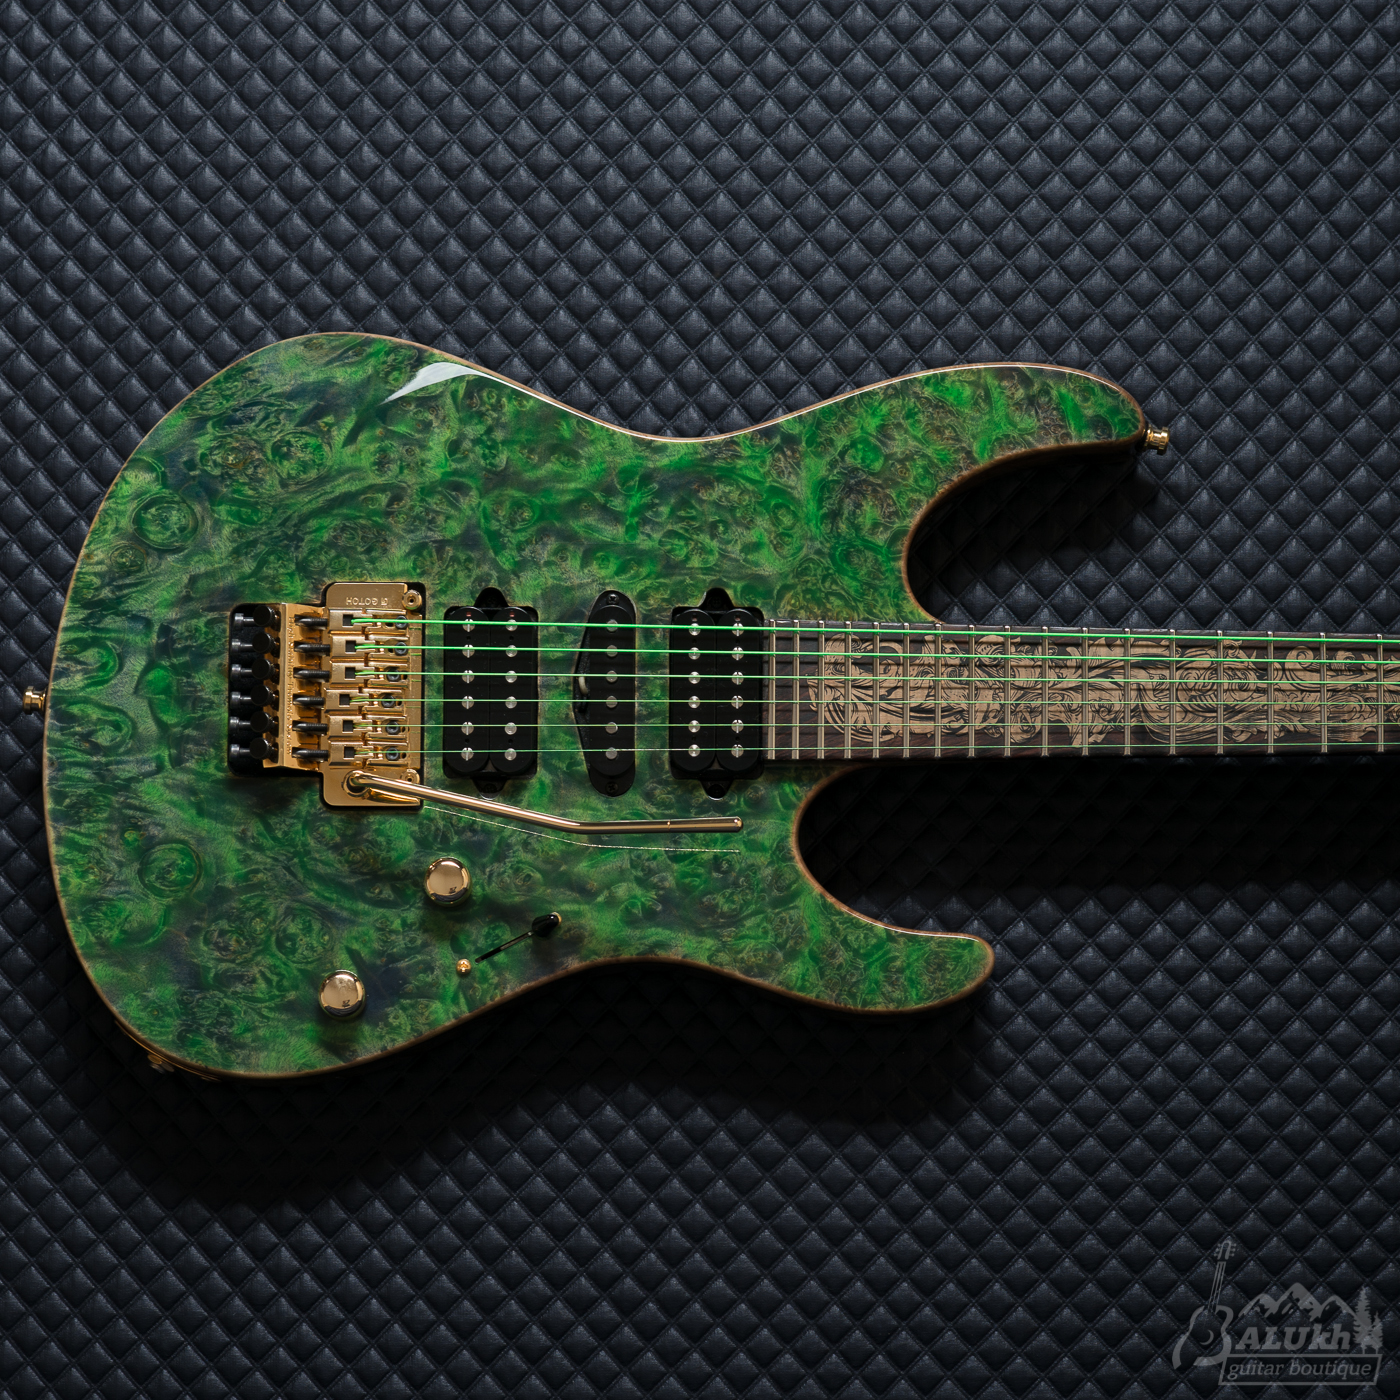 SUHR – The 2013 collection #1